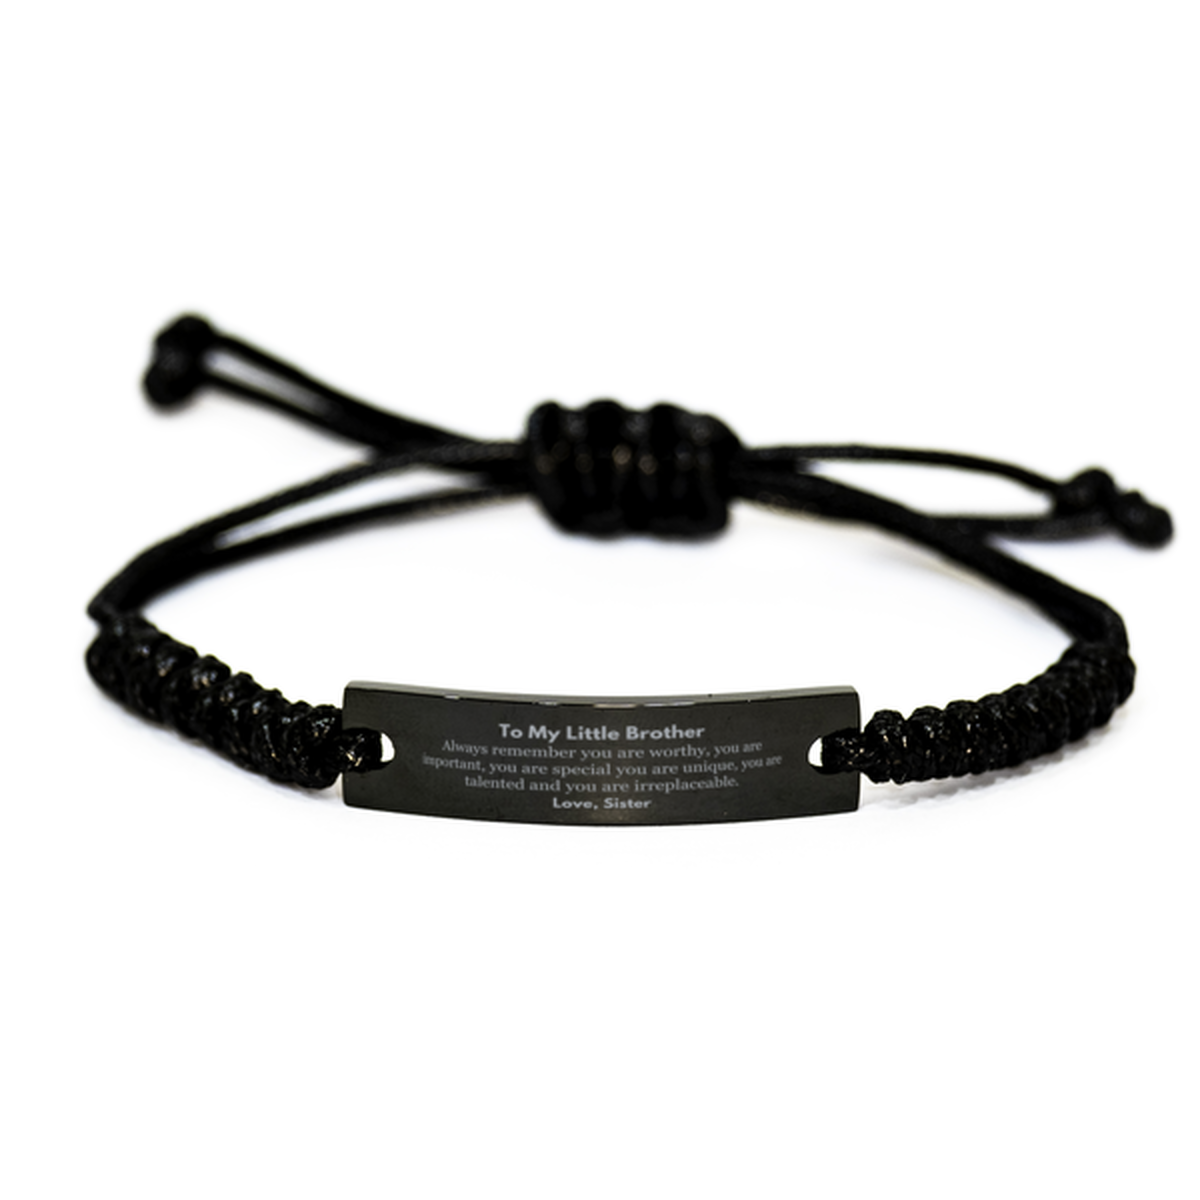 Little Brother Birthday Gifts from Sister, Inspirational Black Rope Bracelet for Little Brother Christmas Graduation Gifts for Little Brother Always remember you are worthy, you are important. Love, Sister